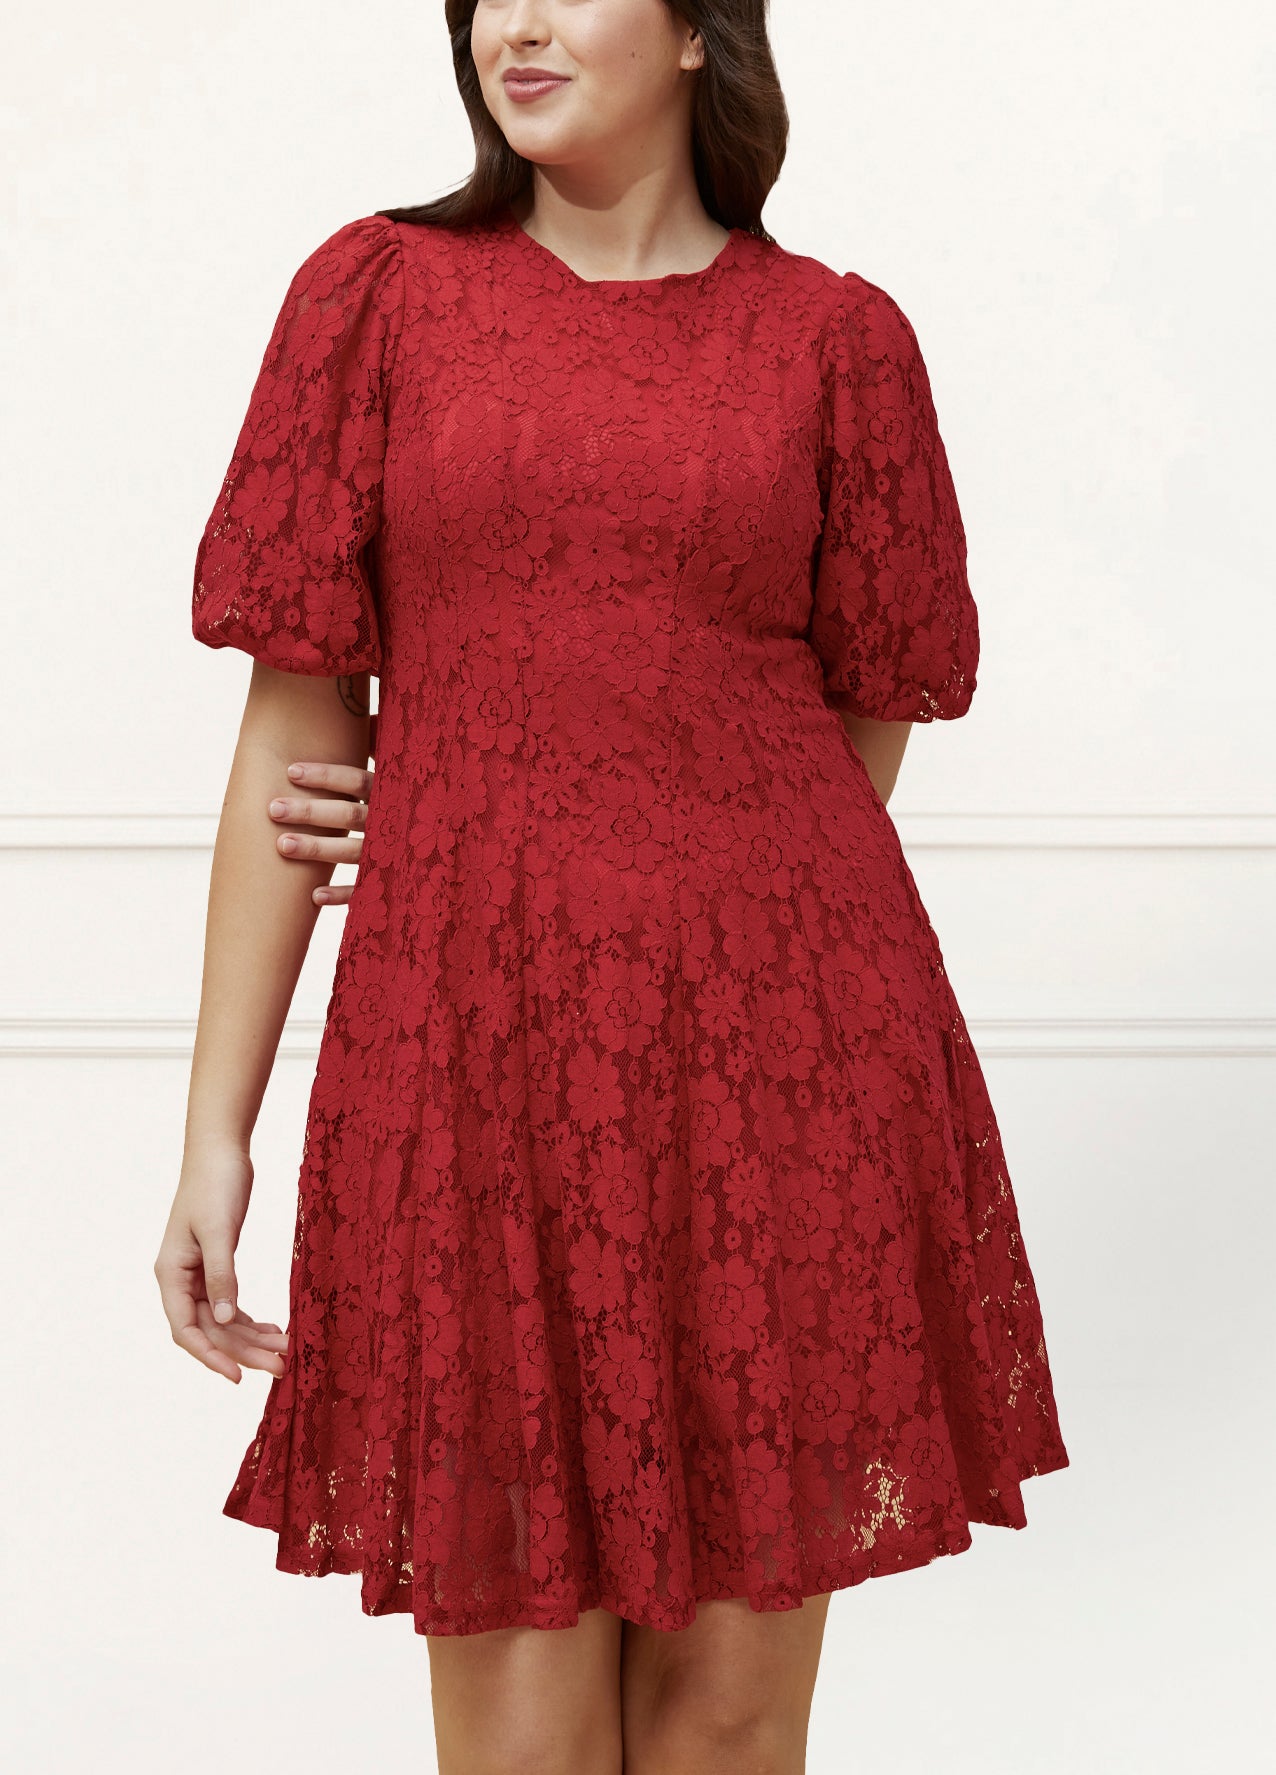 Calista Dress Cotton Fit & Flare Red Lace - Onze Montreal